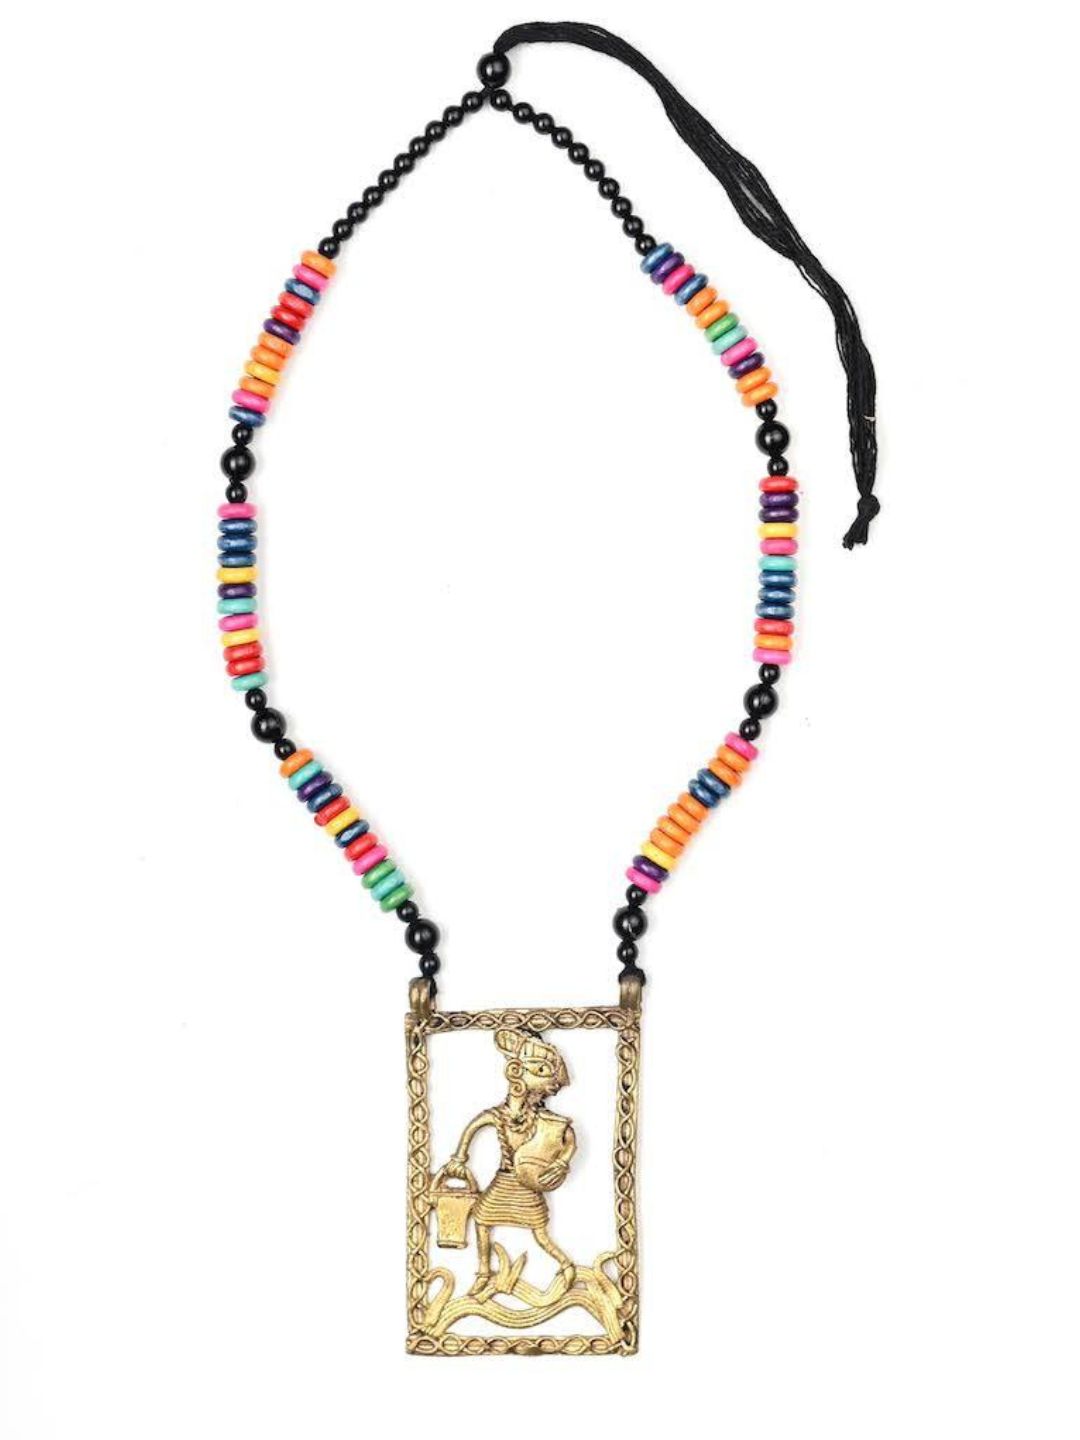 Large Dokra Pitcher Man Pendant with Colourful Beads